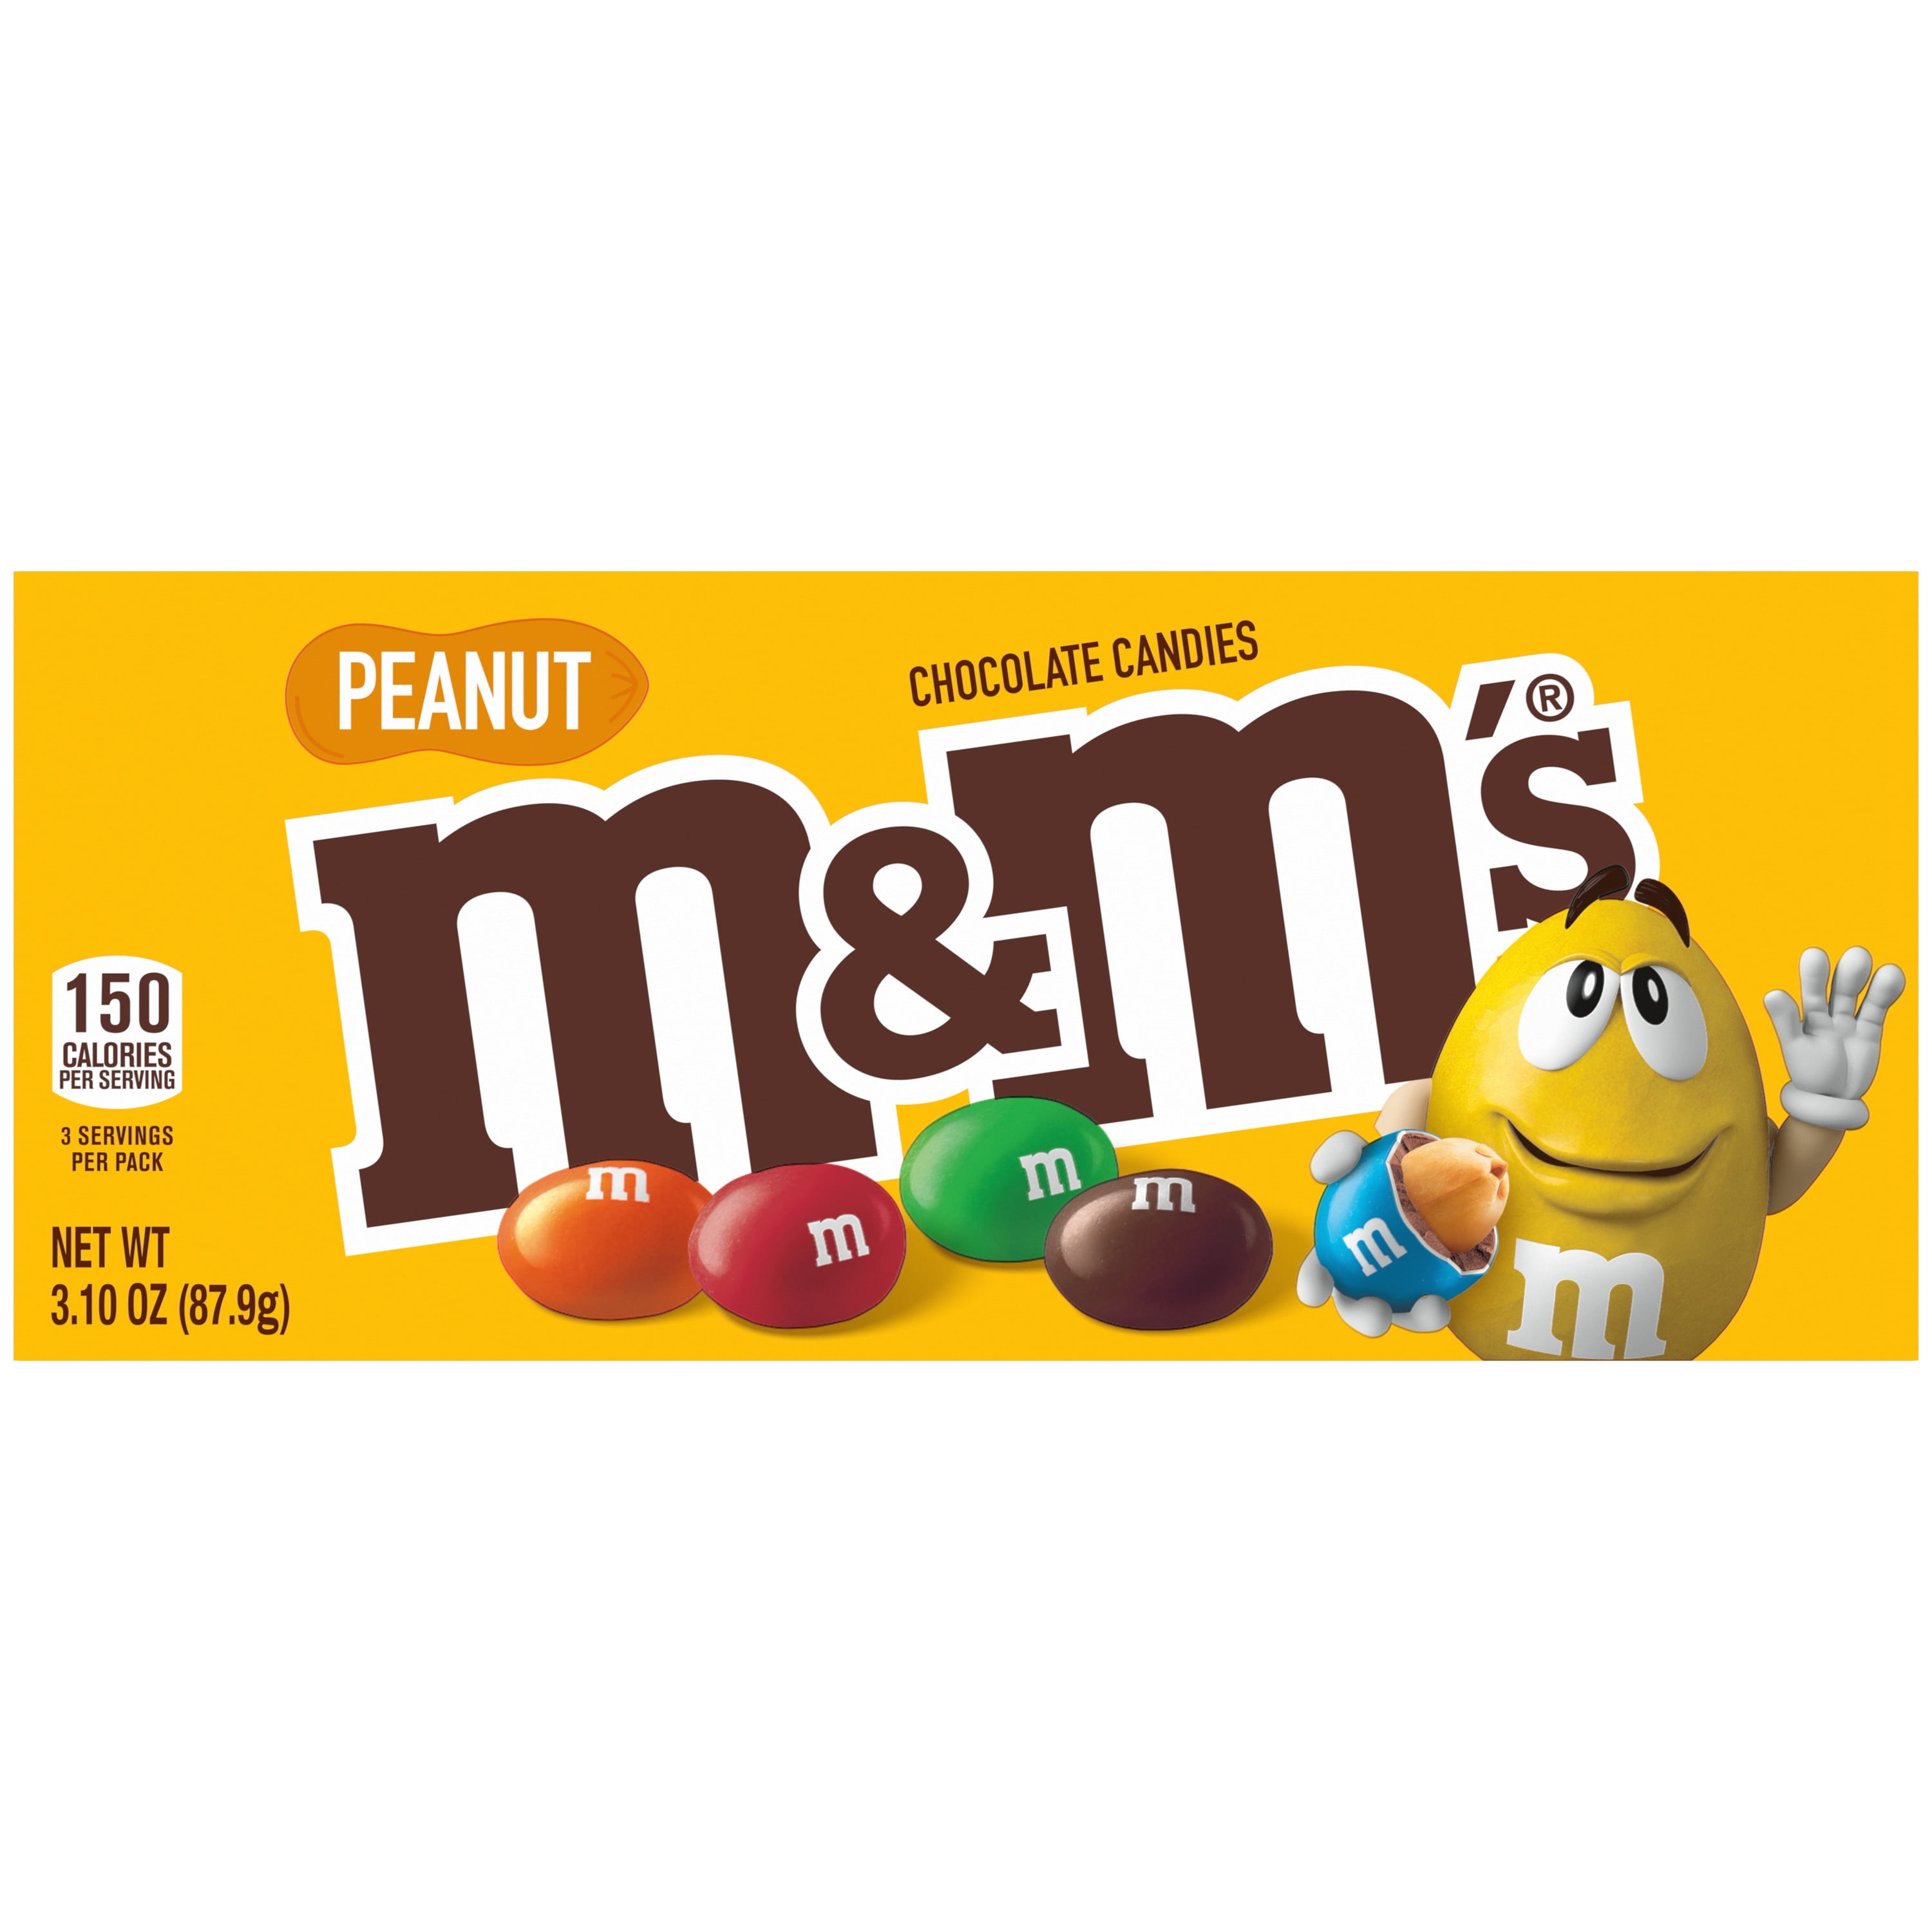 M&M's Milk Chocolate-Coated Candy with Peanuts 48 ct Box 8/Case